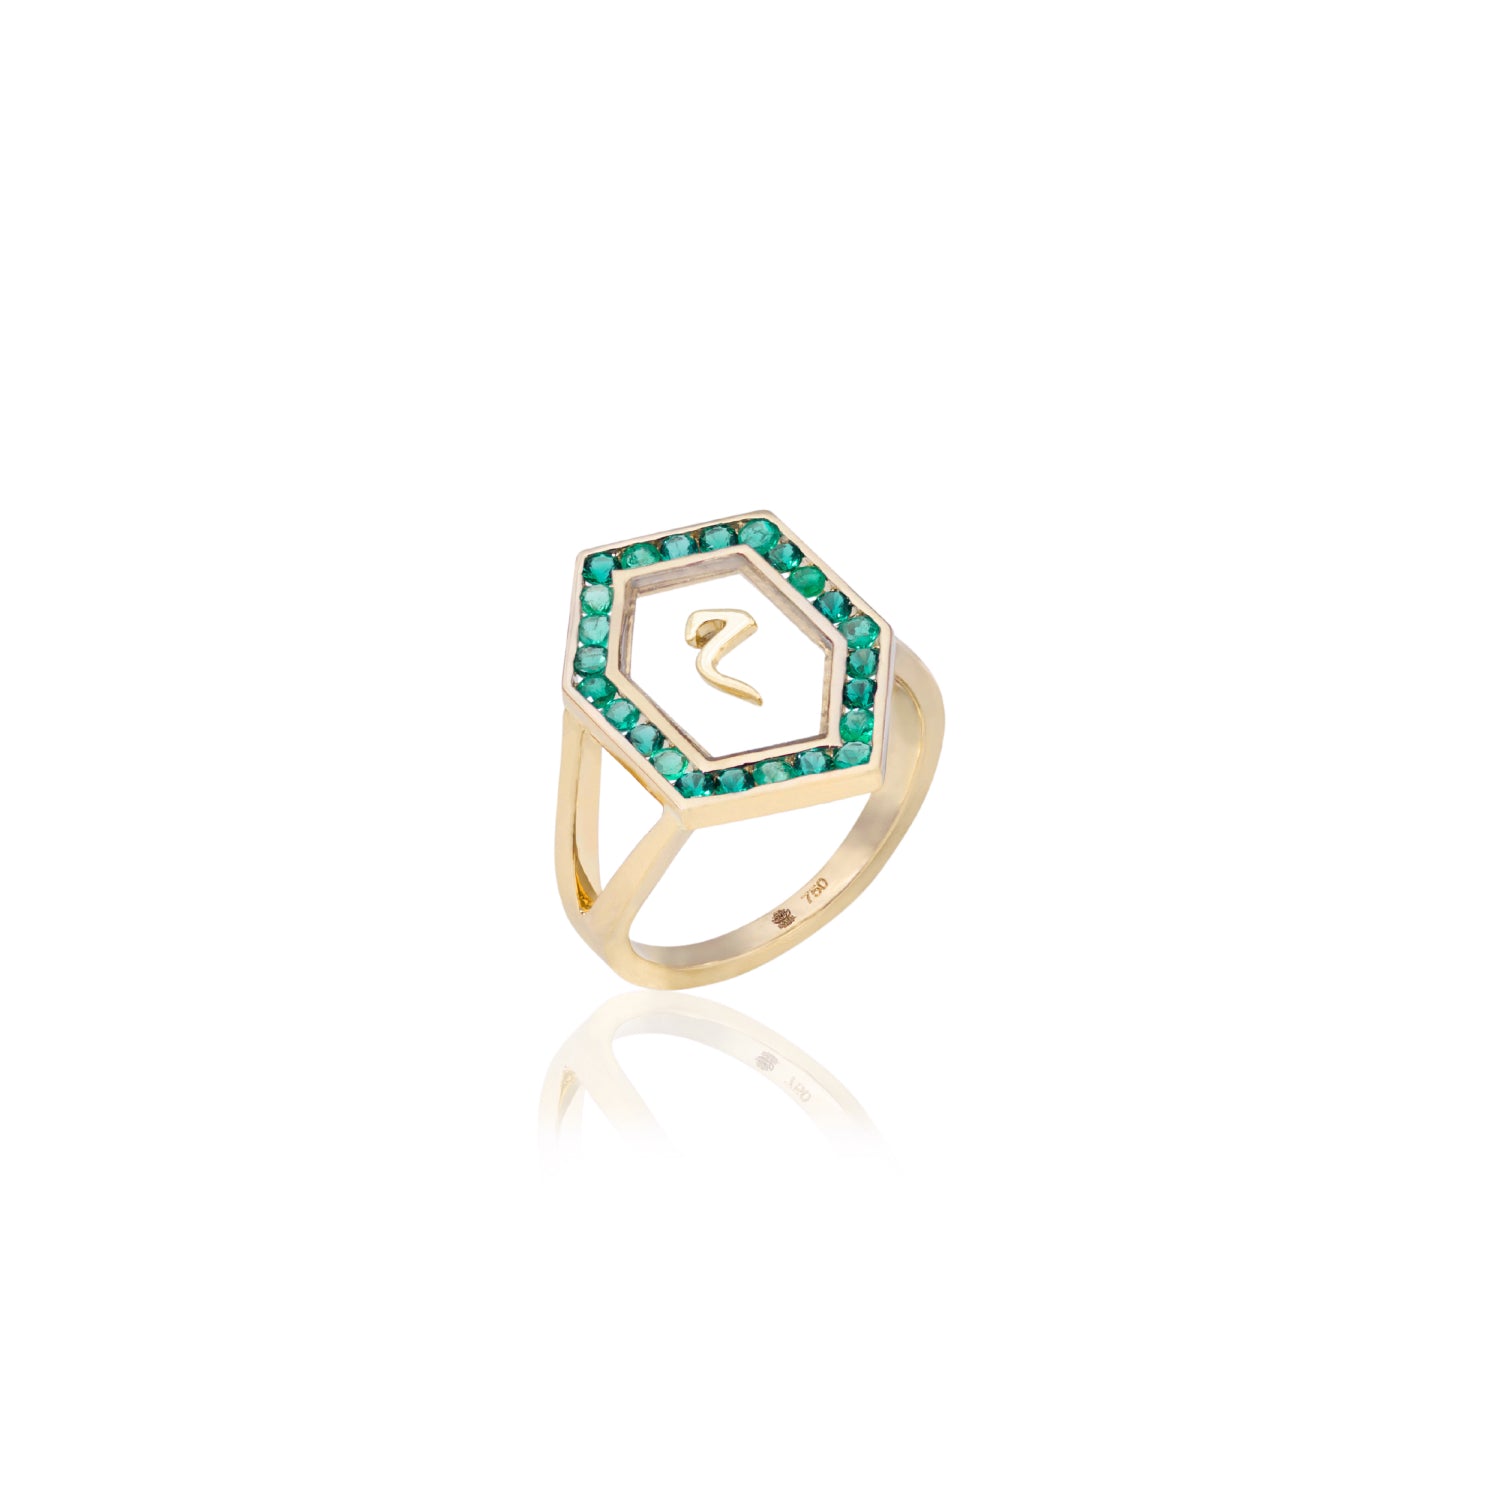 Qamoos 1.0 Letter م Emerald Ring in Yellow Gold